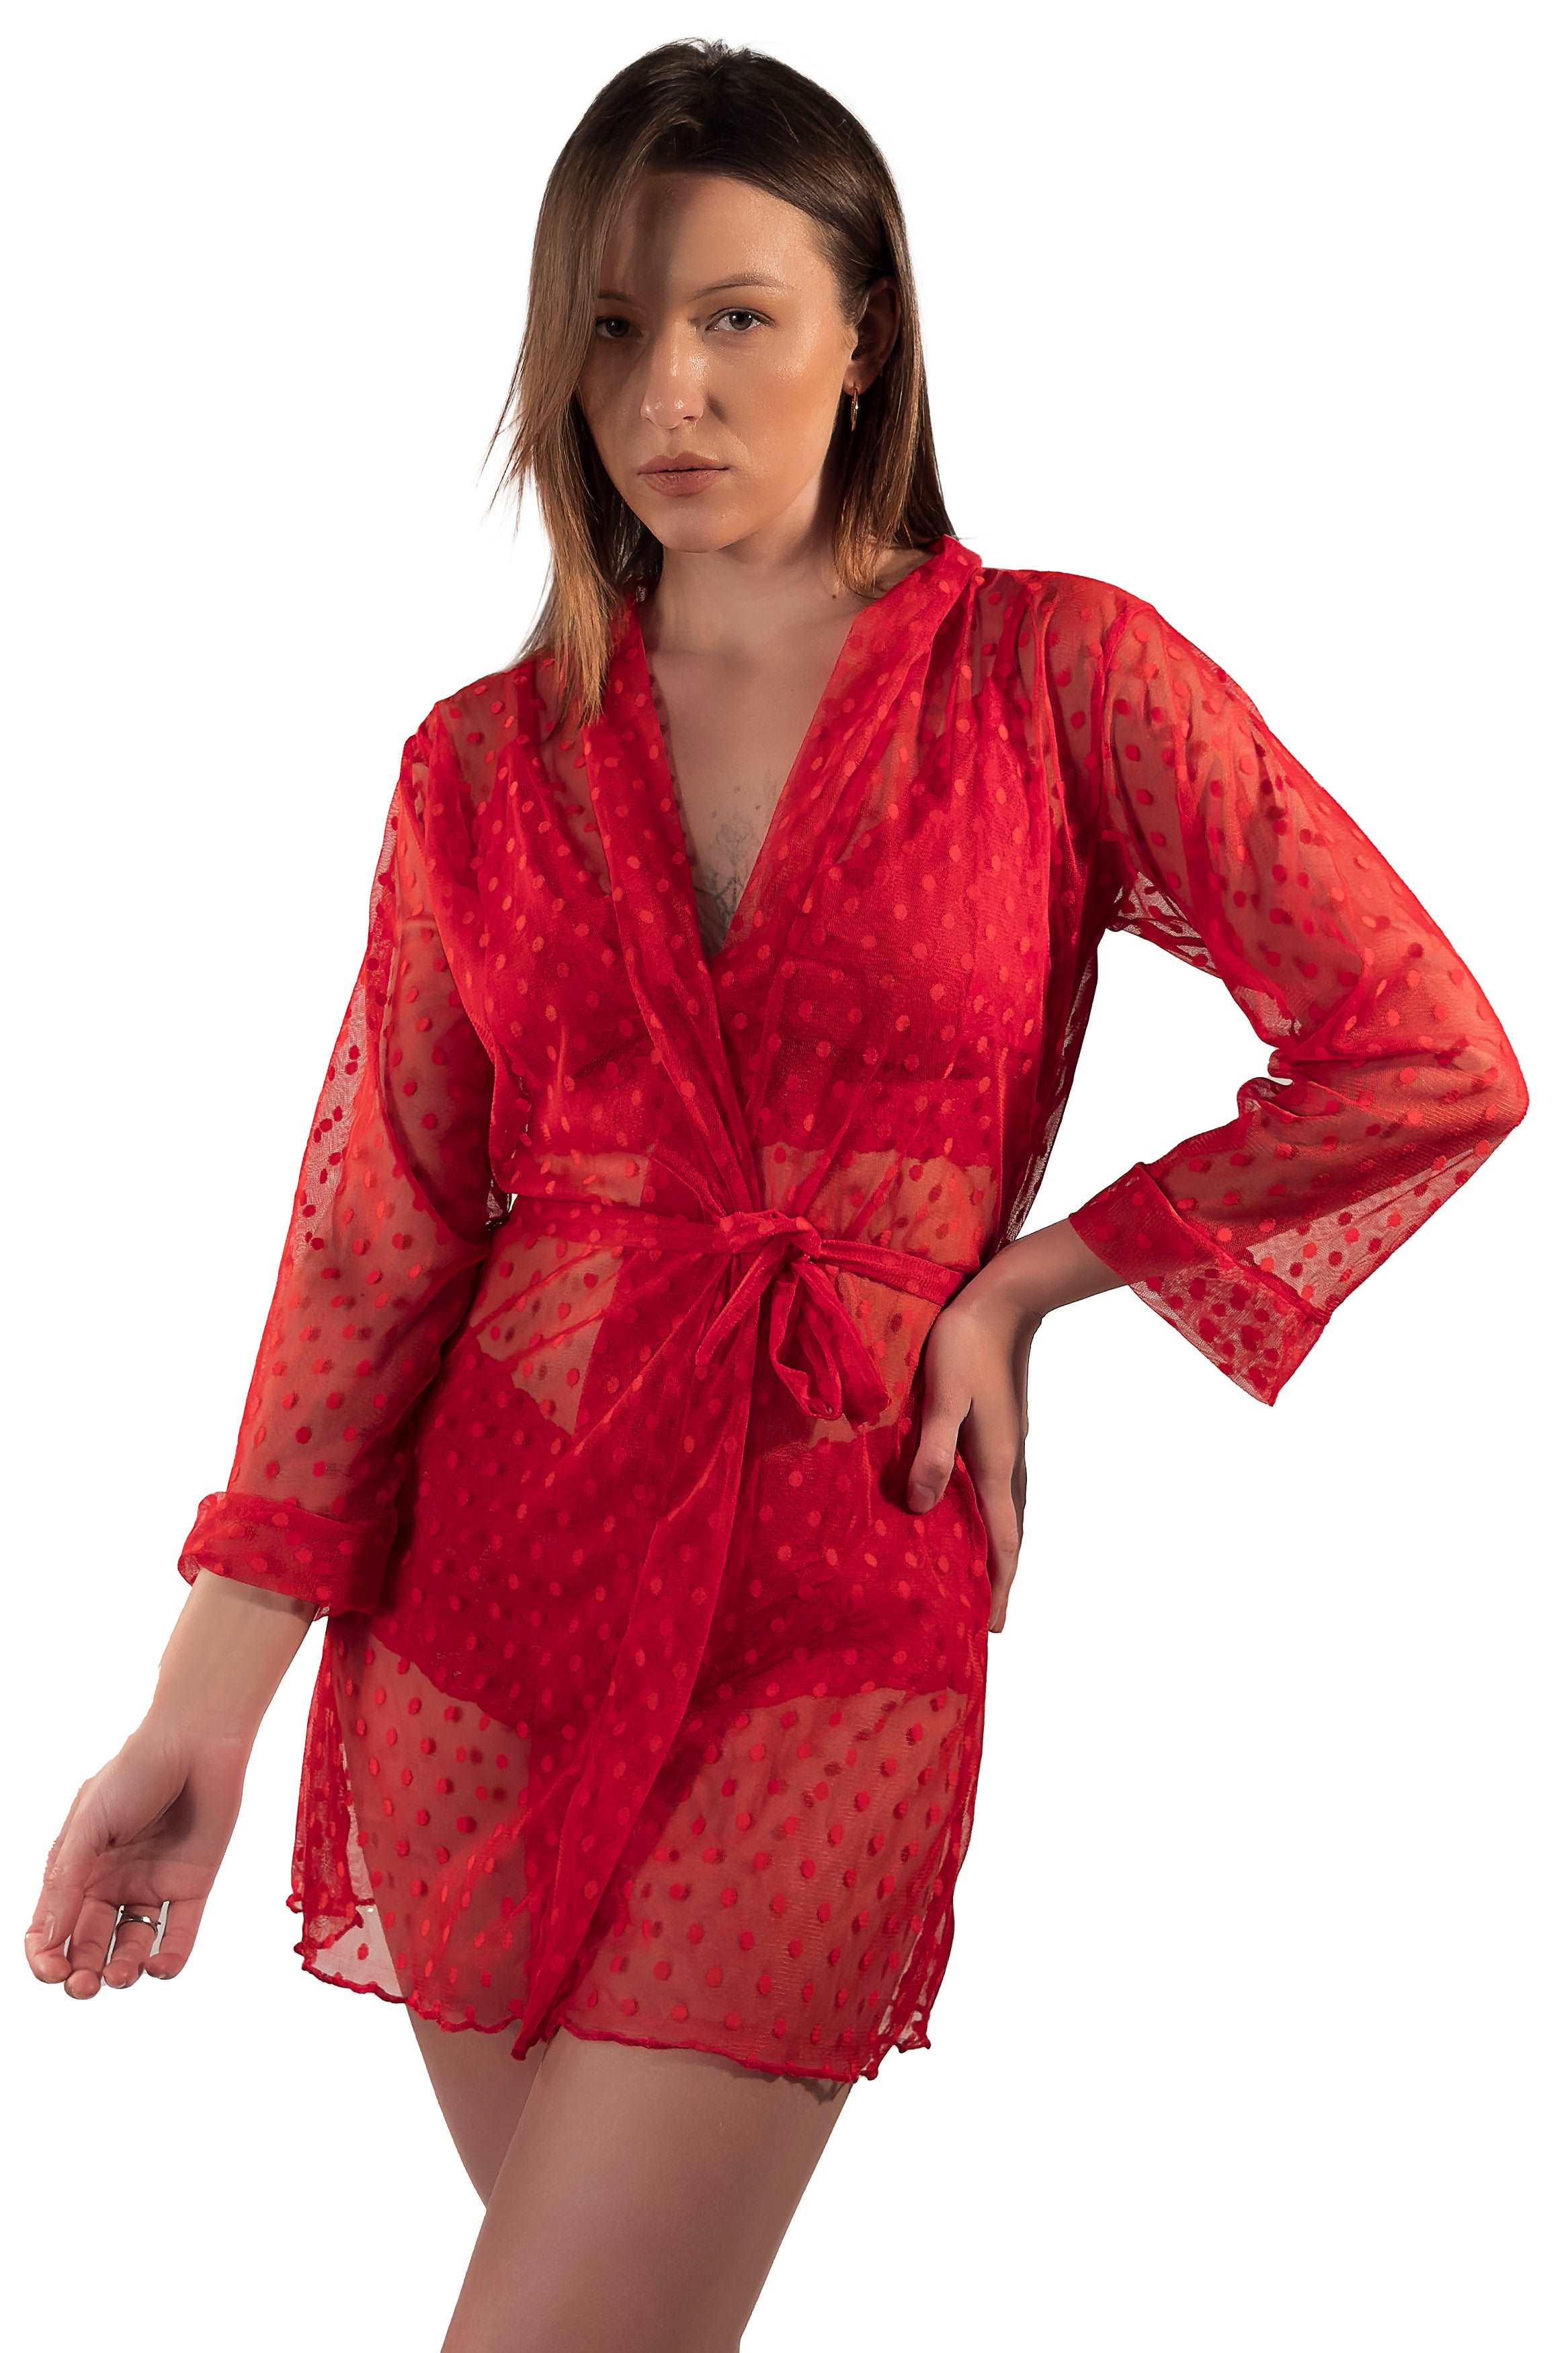 Sultry Red Lace Lingerie and Robe Ensemble